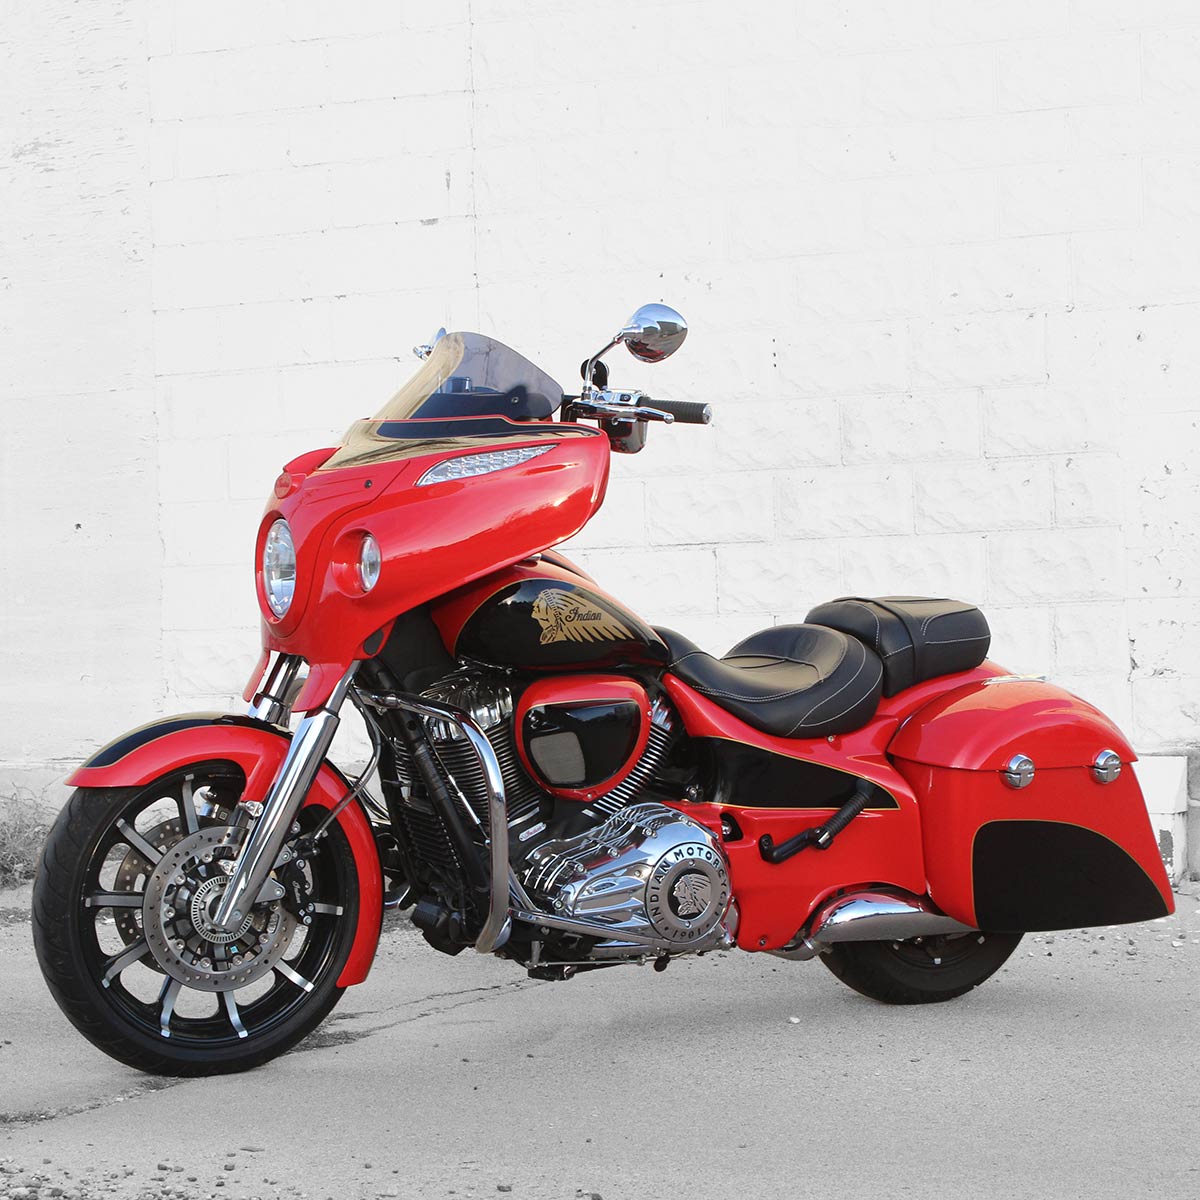 Reytelo Side Covers for Indian® 2014-2020 Chieftain Classic and Roadmaster, 2016-2018 Chieftain Limited Motorcycles shown on 2017 Chieftain(Shown on 2017 Chieftain)